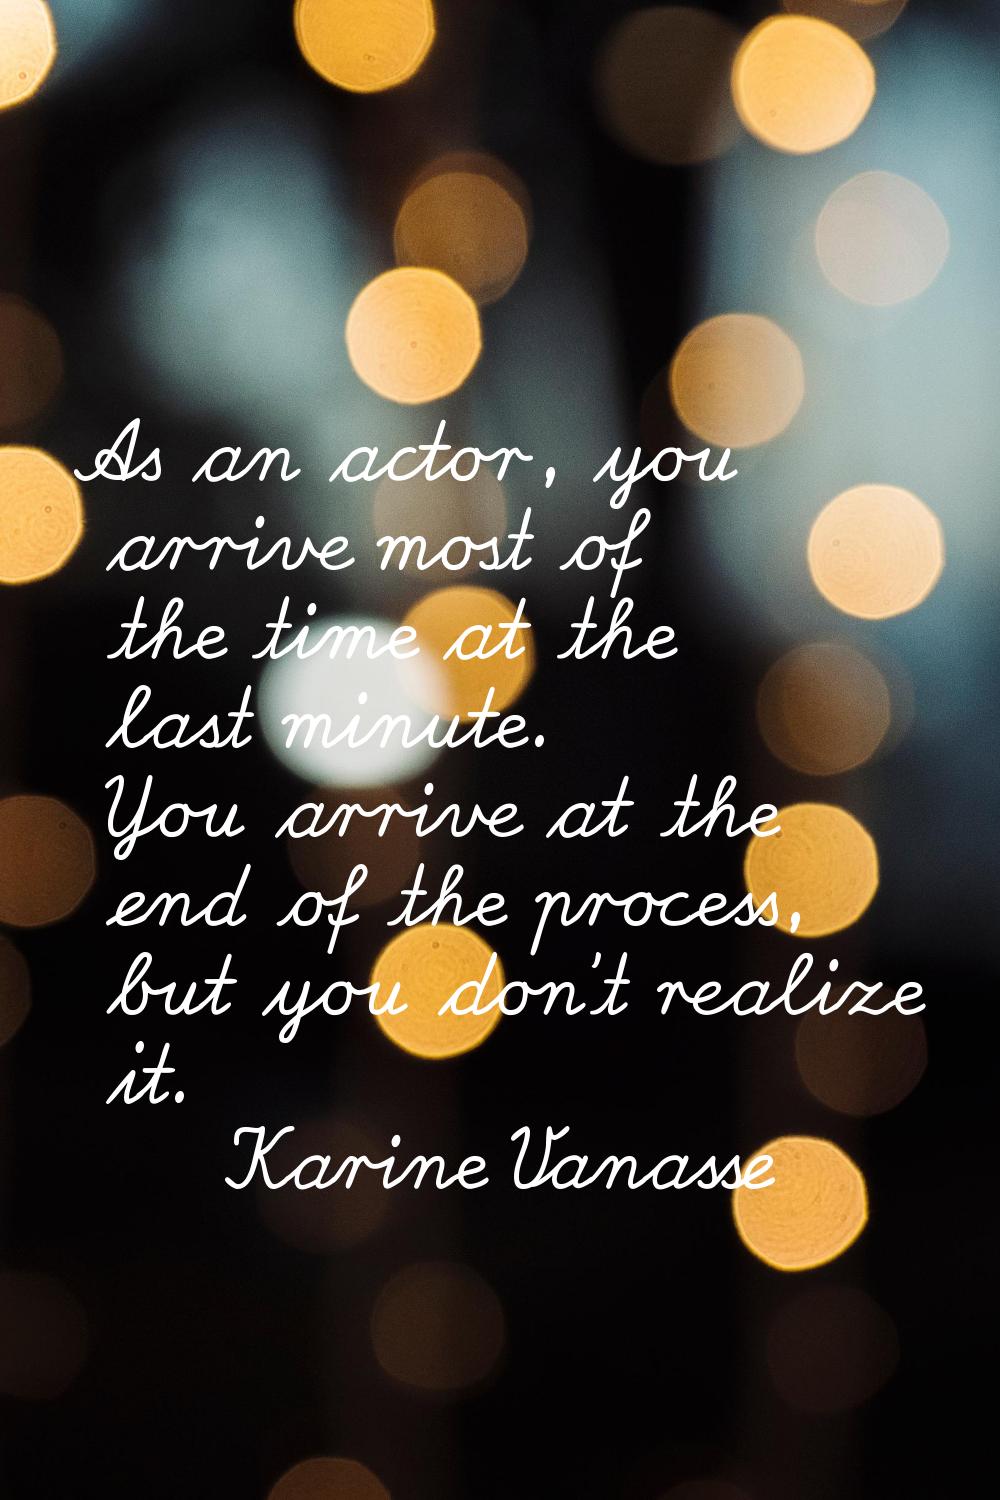 As an actor, you arrive most of the time at the last minute. You arrive at the end of the process, 